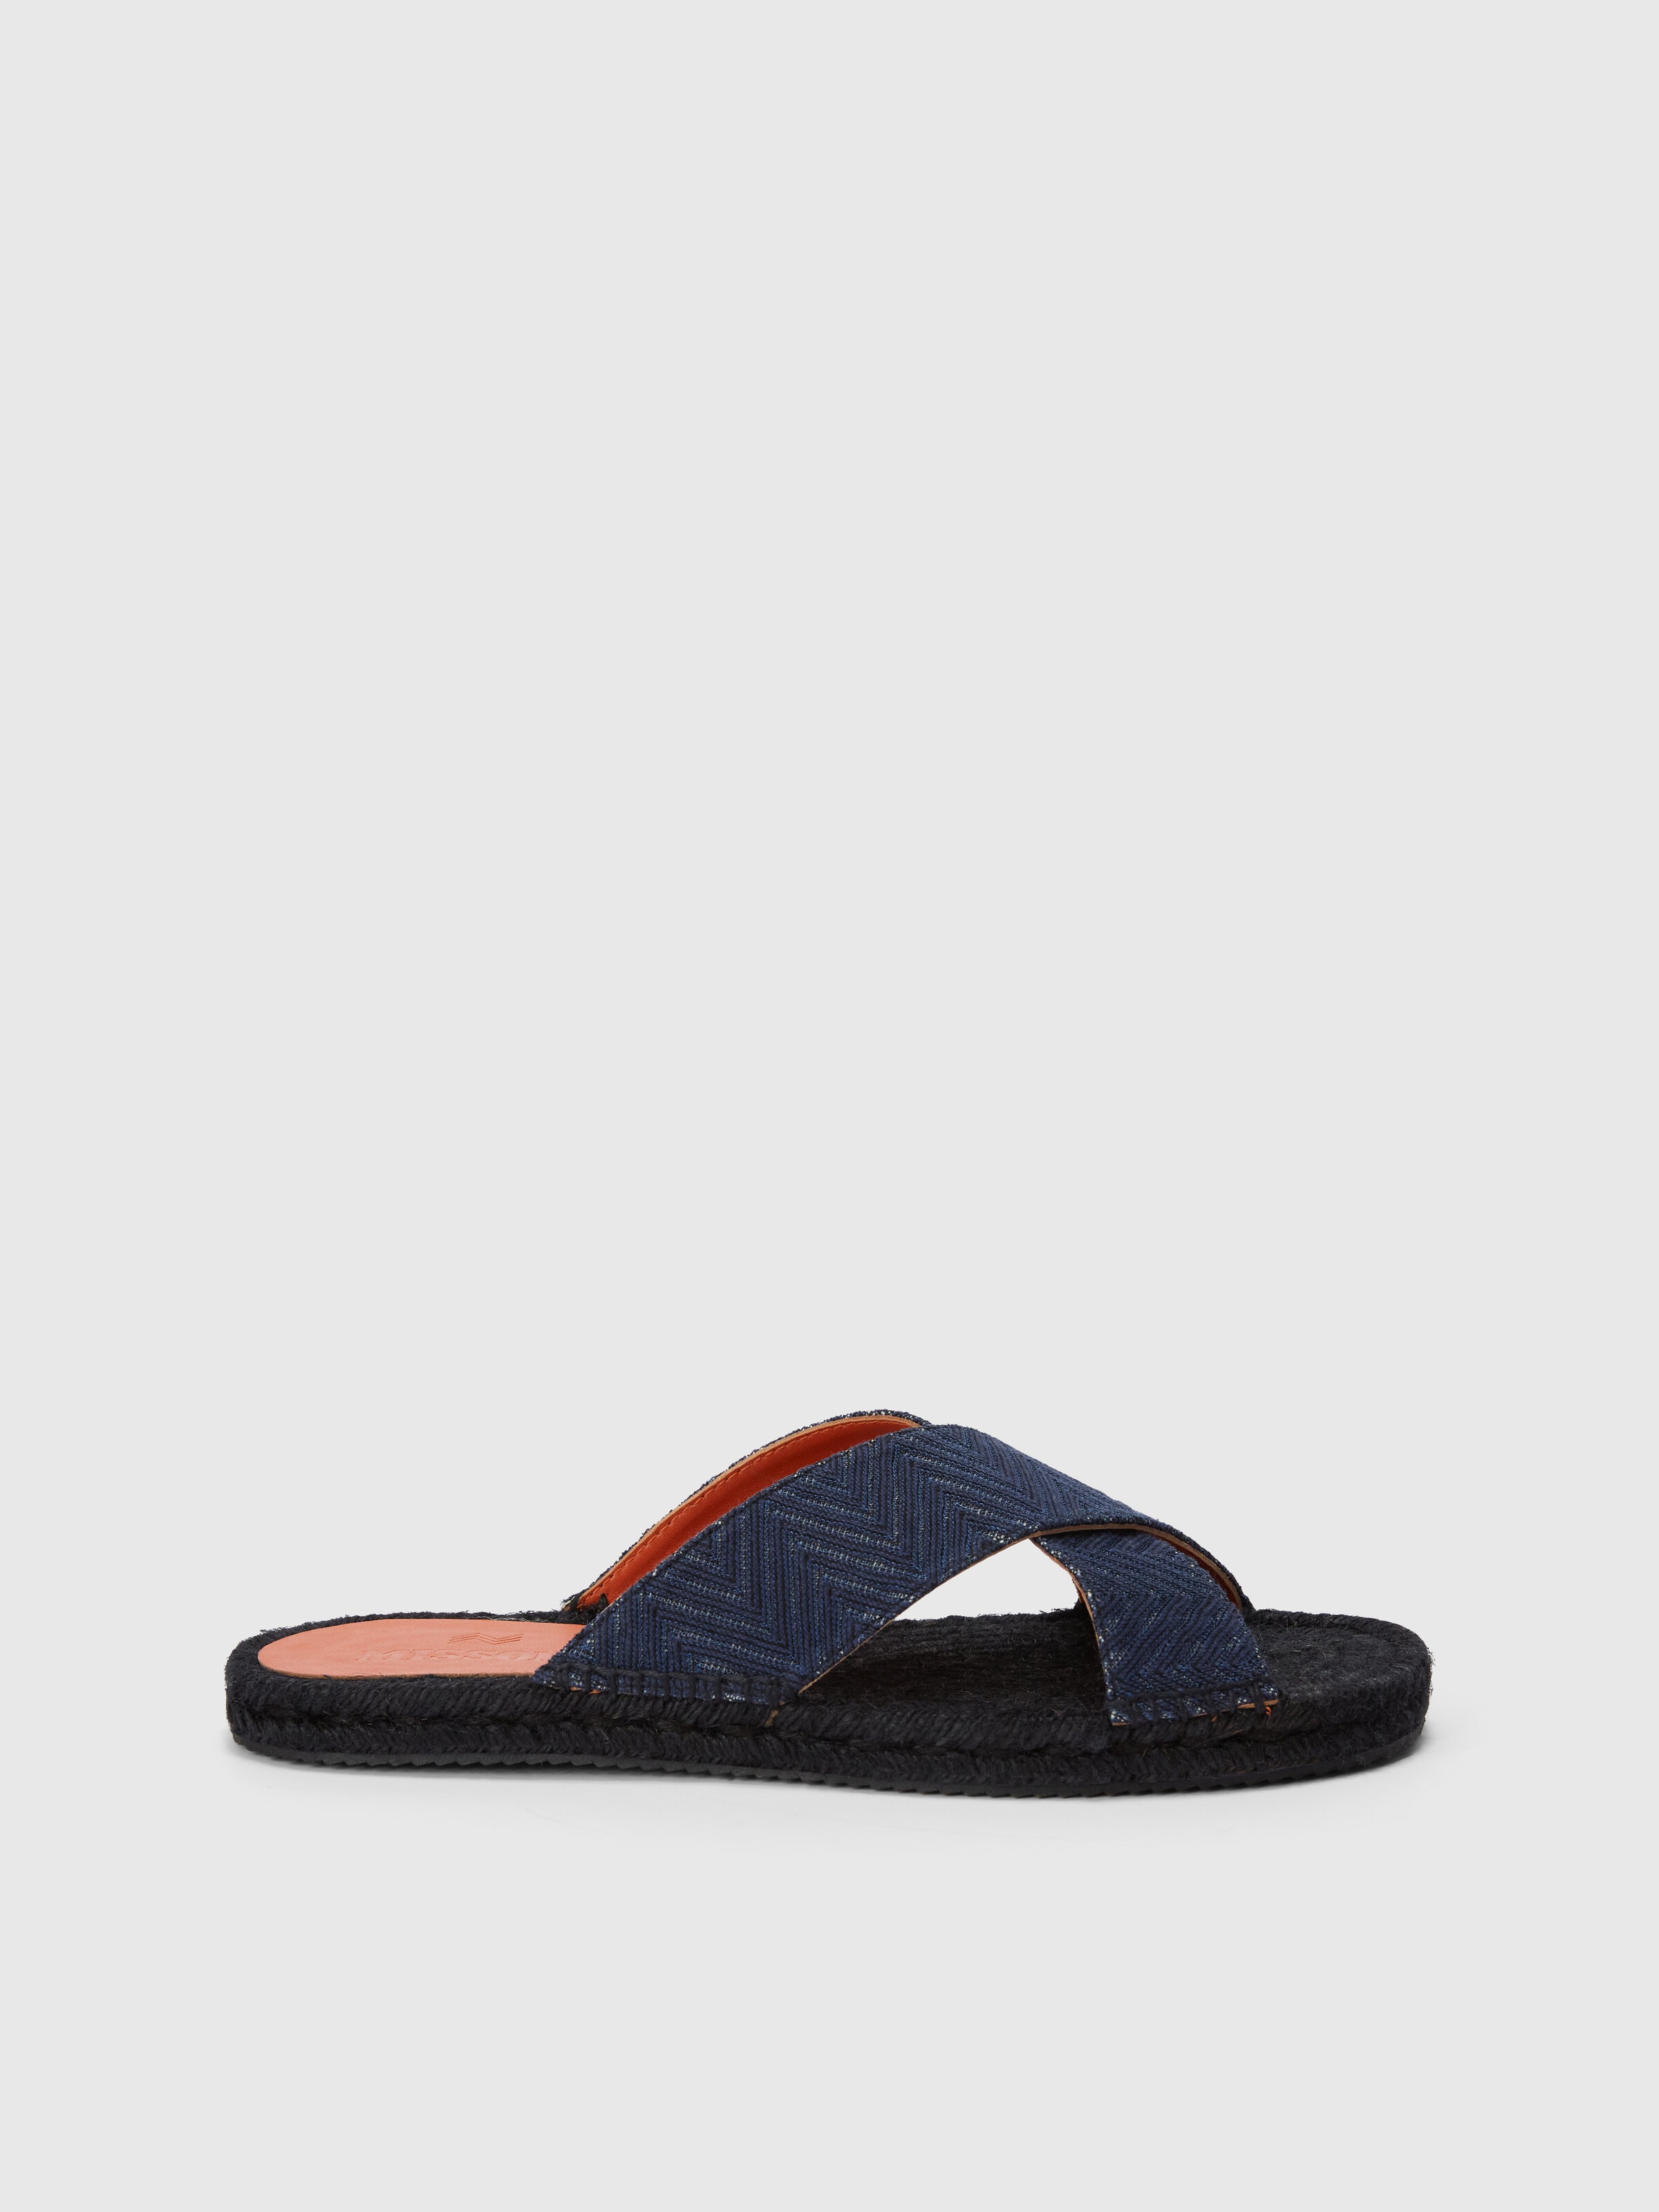 Slippers with double crossed strap and chevron pattern   , Navy Blue  - 0